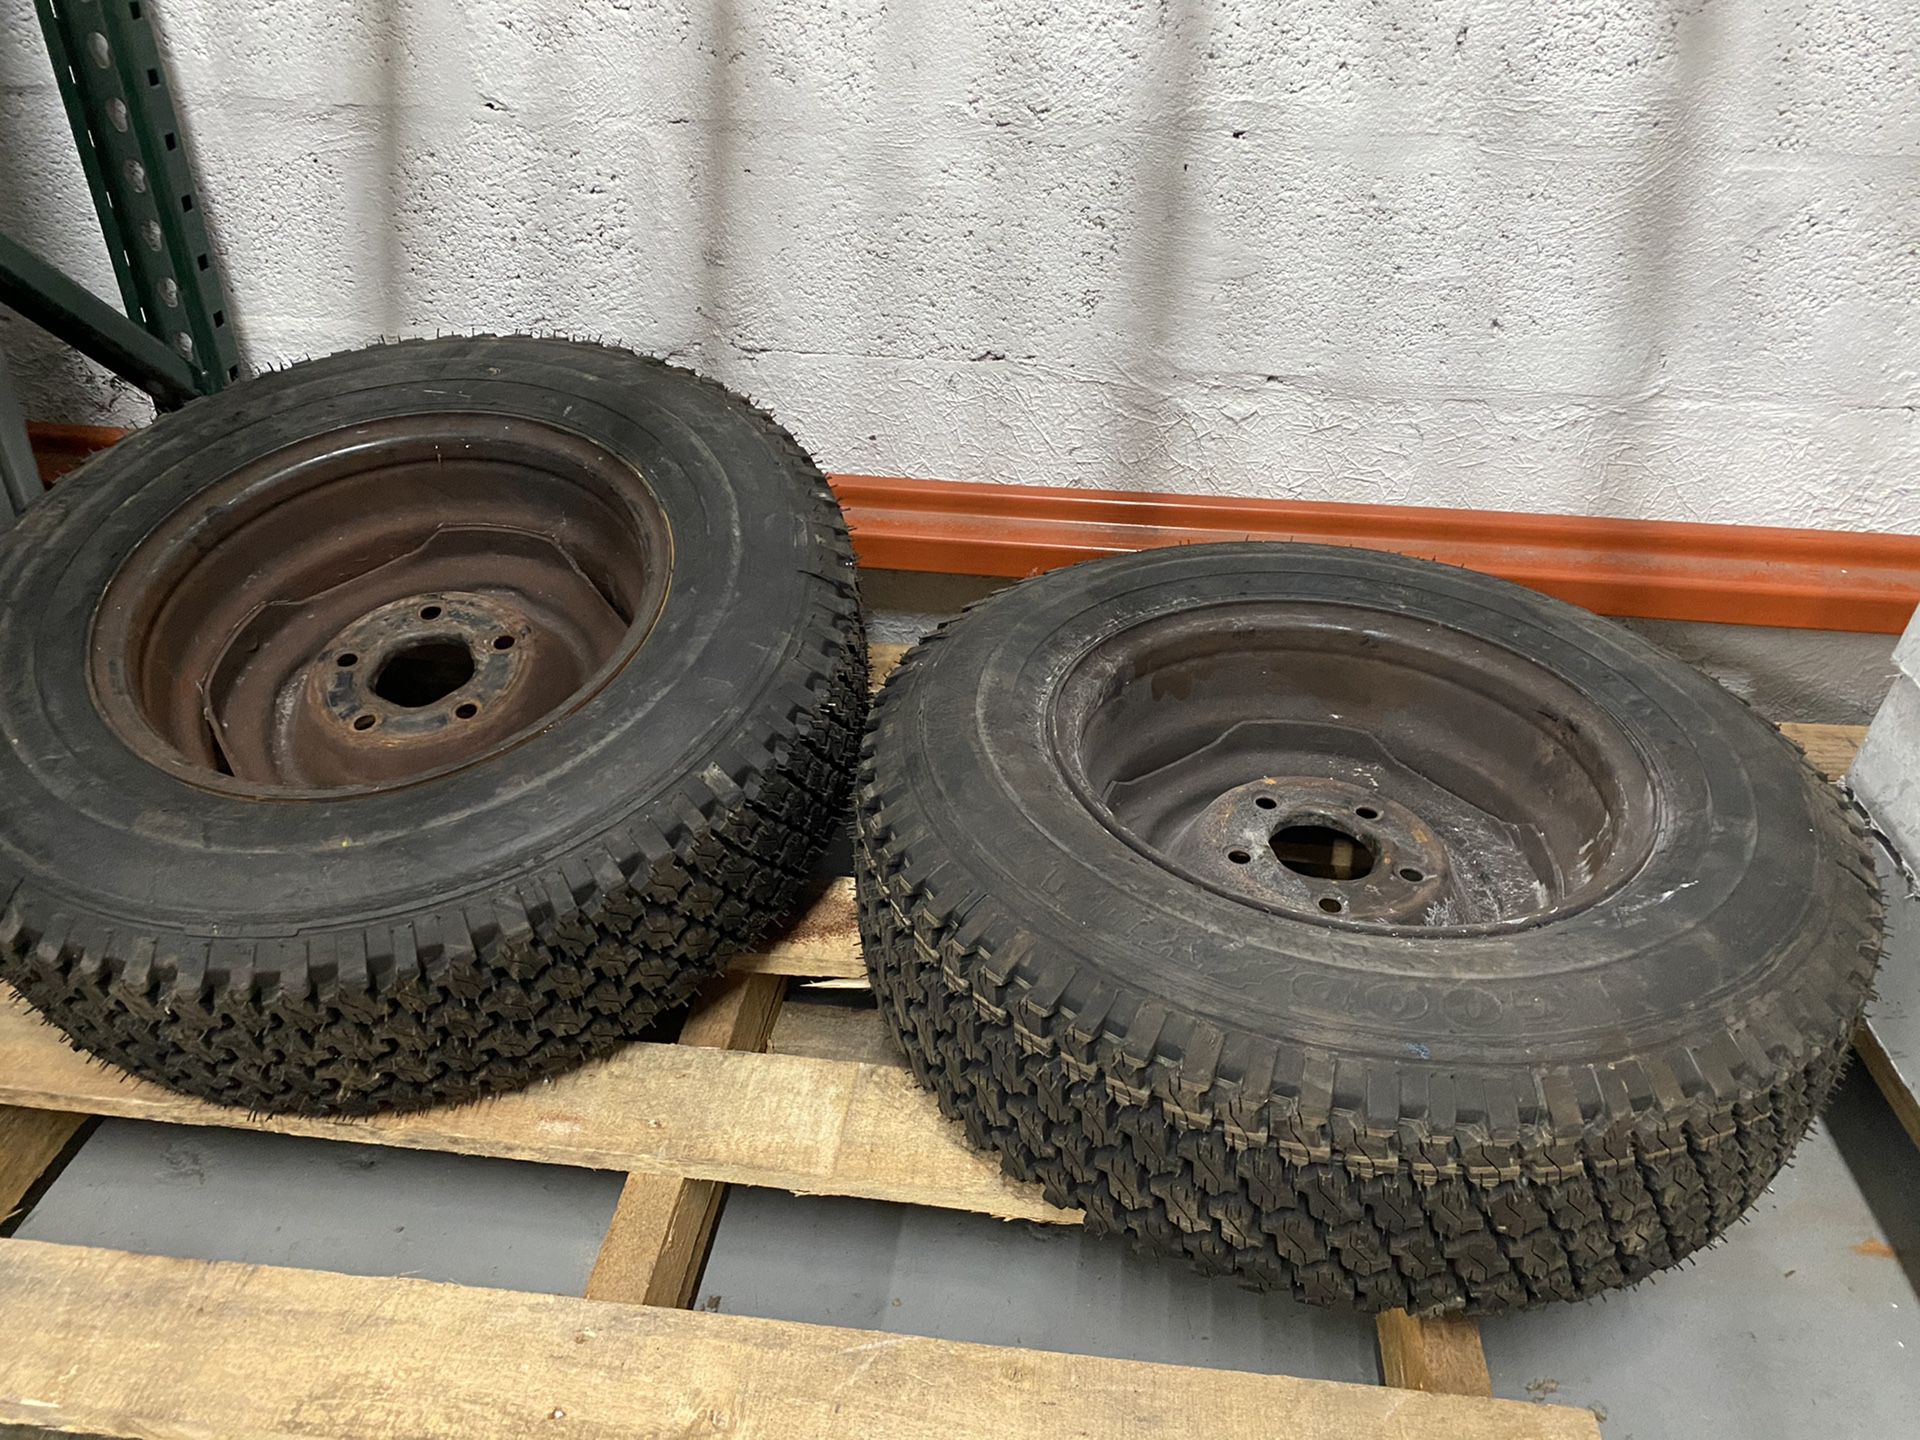 LT 195 75 R14 , set of new trailer tires with rim